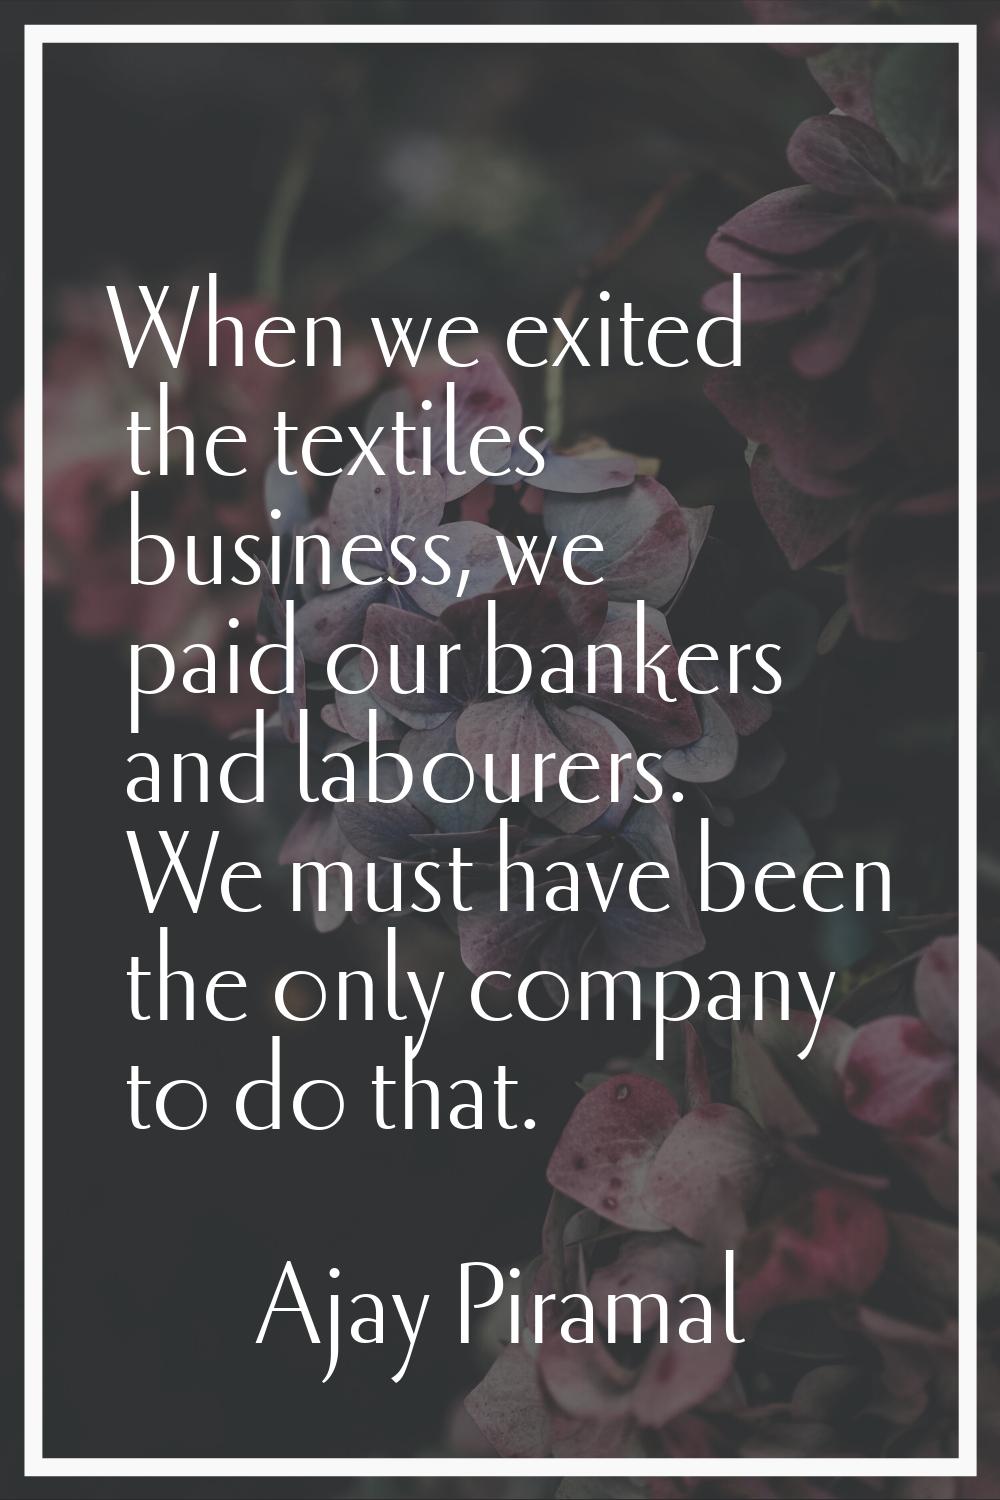 When we exited the textiles business, we paid our bankers and labourers. We must have been the only